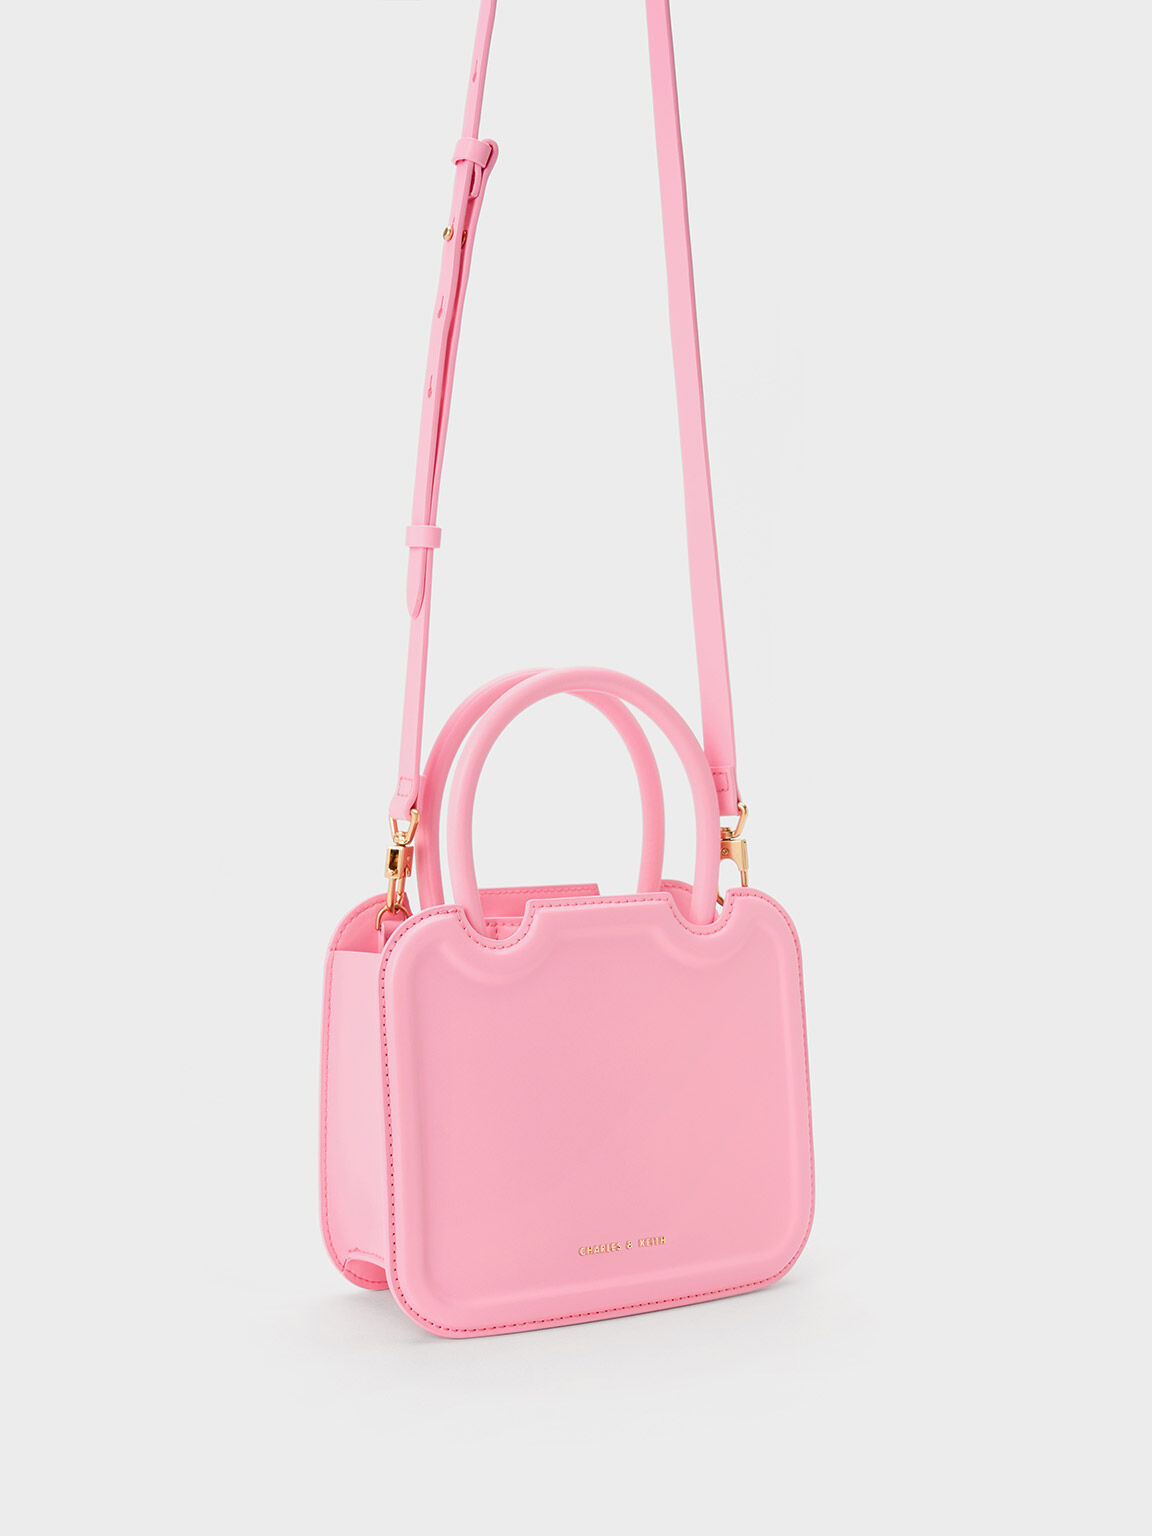 Pink Perline Sculptural Tote Bag Charles And Keith Qa 